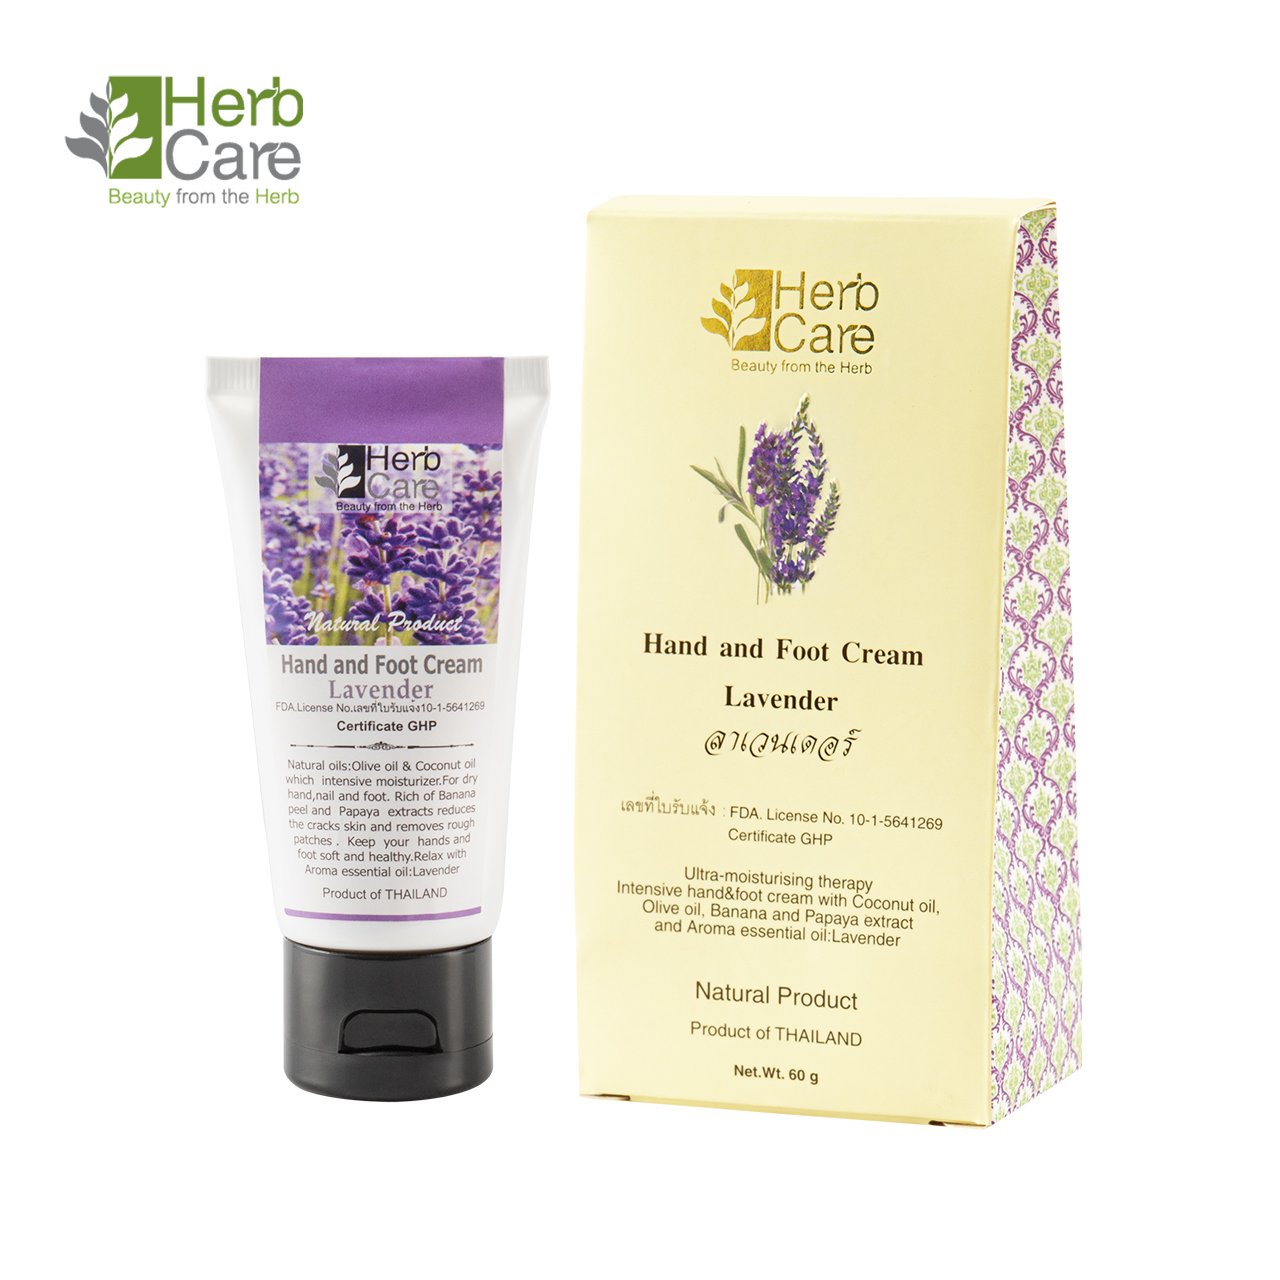 Lavender : Hand and Foot Cream